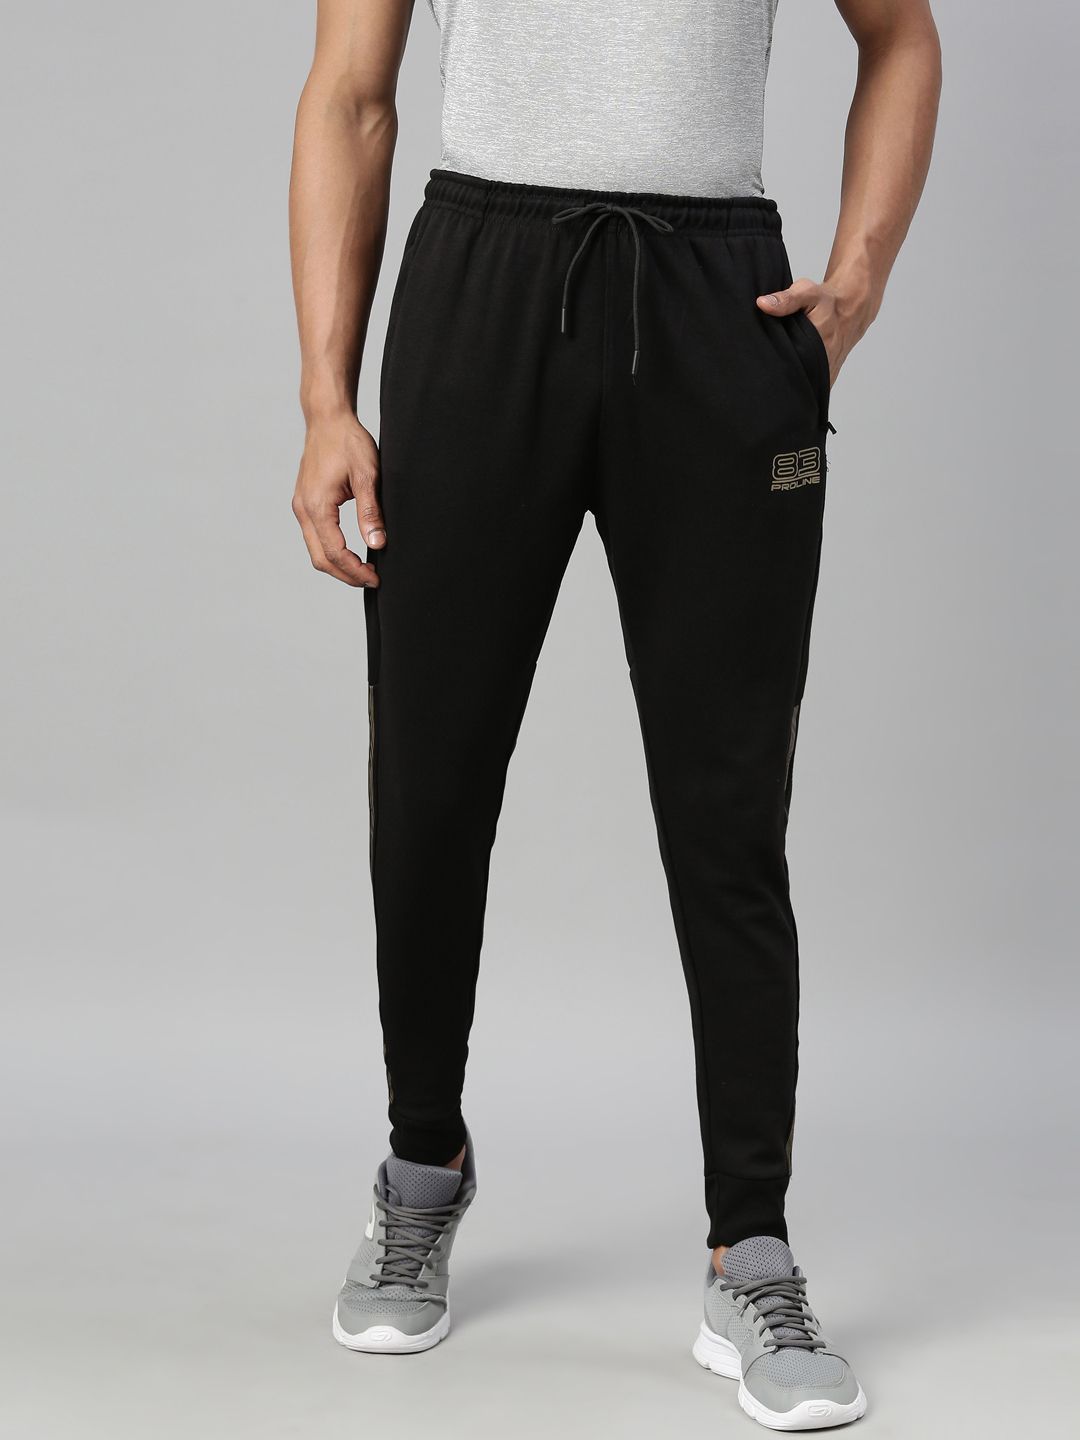 LEEy-world Pants for Men Mens Zip Joggers Pants - Casual Gym Workout Track  Pants Comfortable Slim Fit Tapered Sweatpants with Pockets Black,XL -  Walmart.com